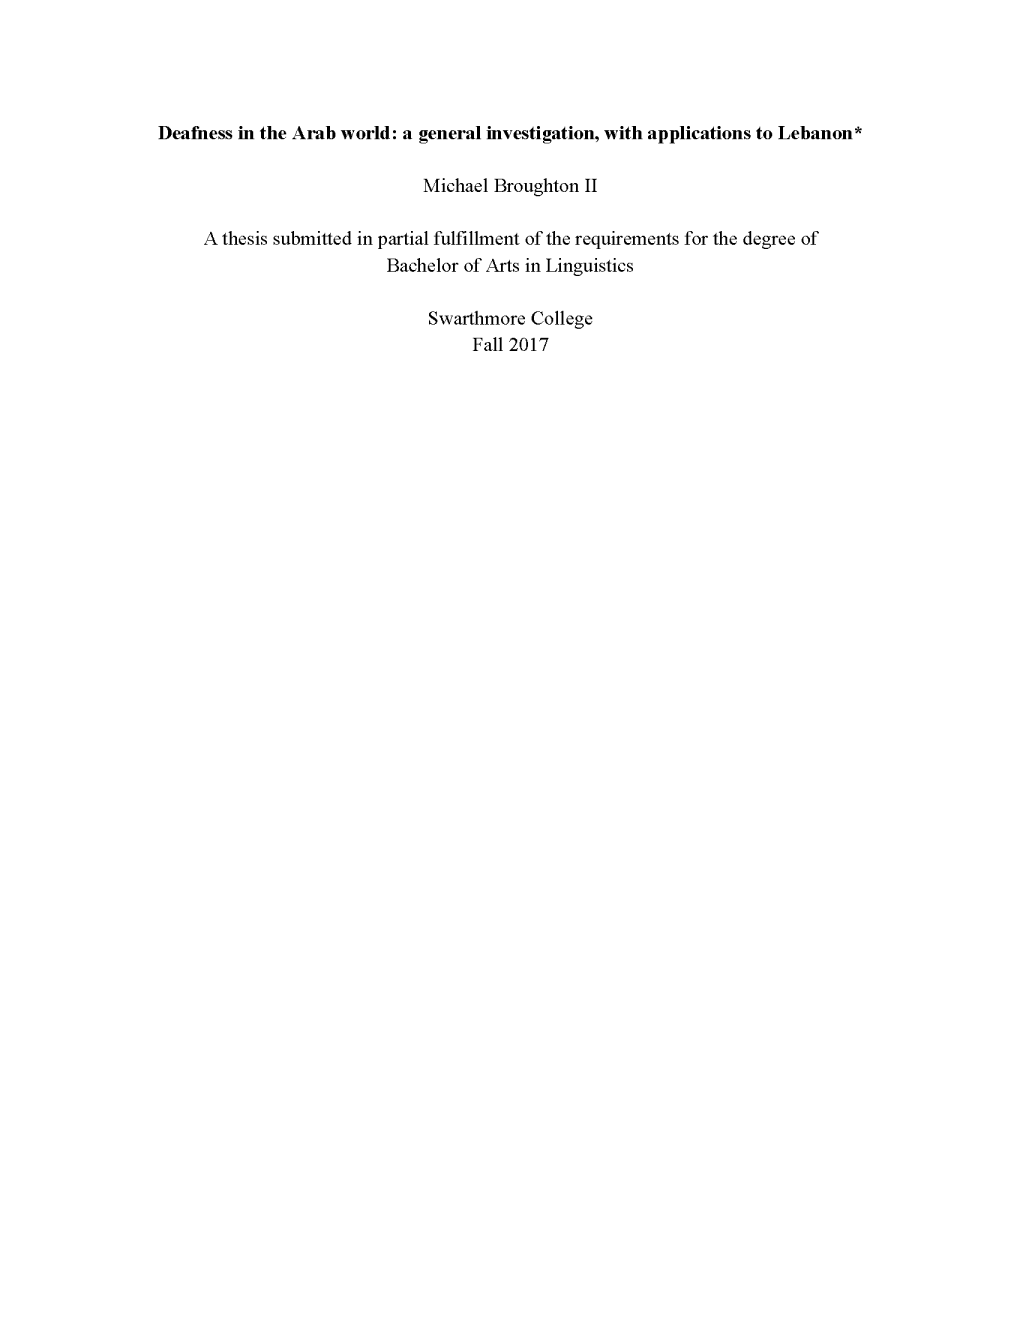 Michael Broughton II a Thesis Submitted in Partial Fulfillment of The